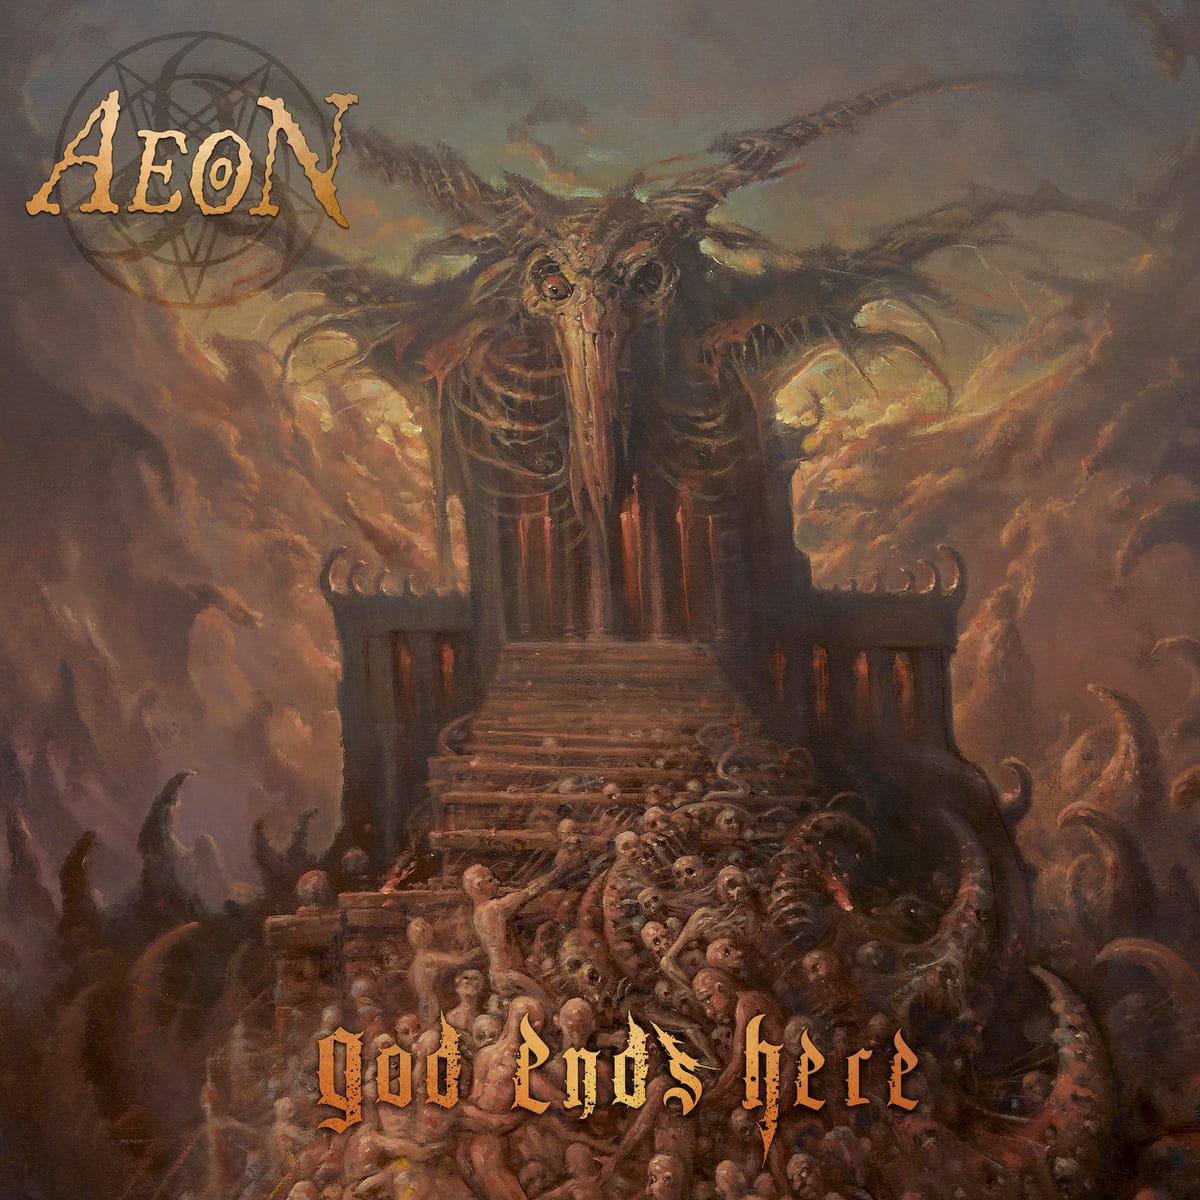 aeon-god-ends-here-album-cover